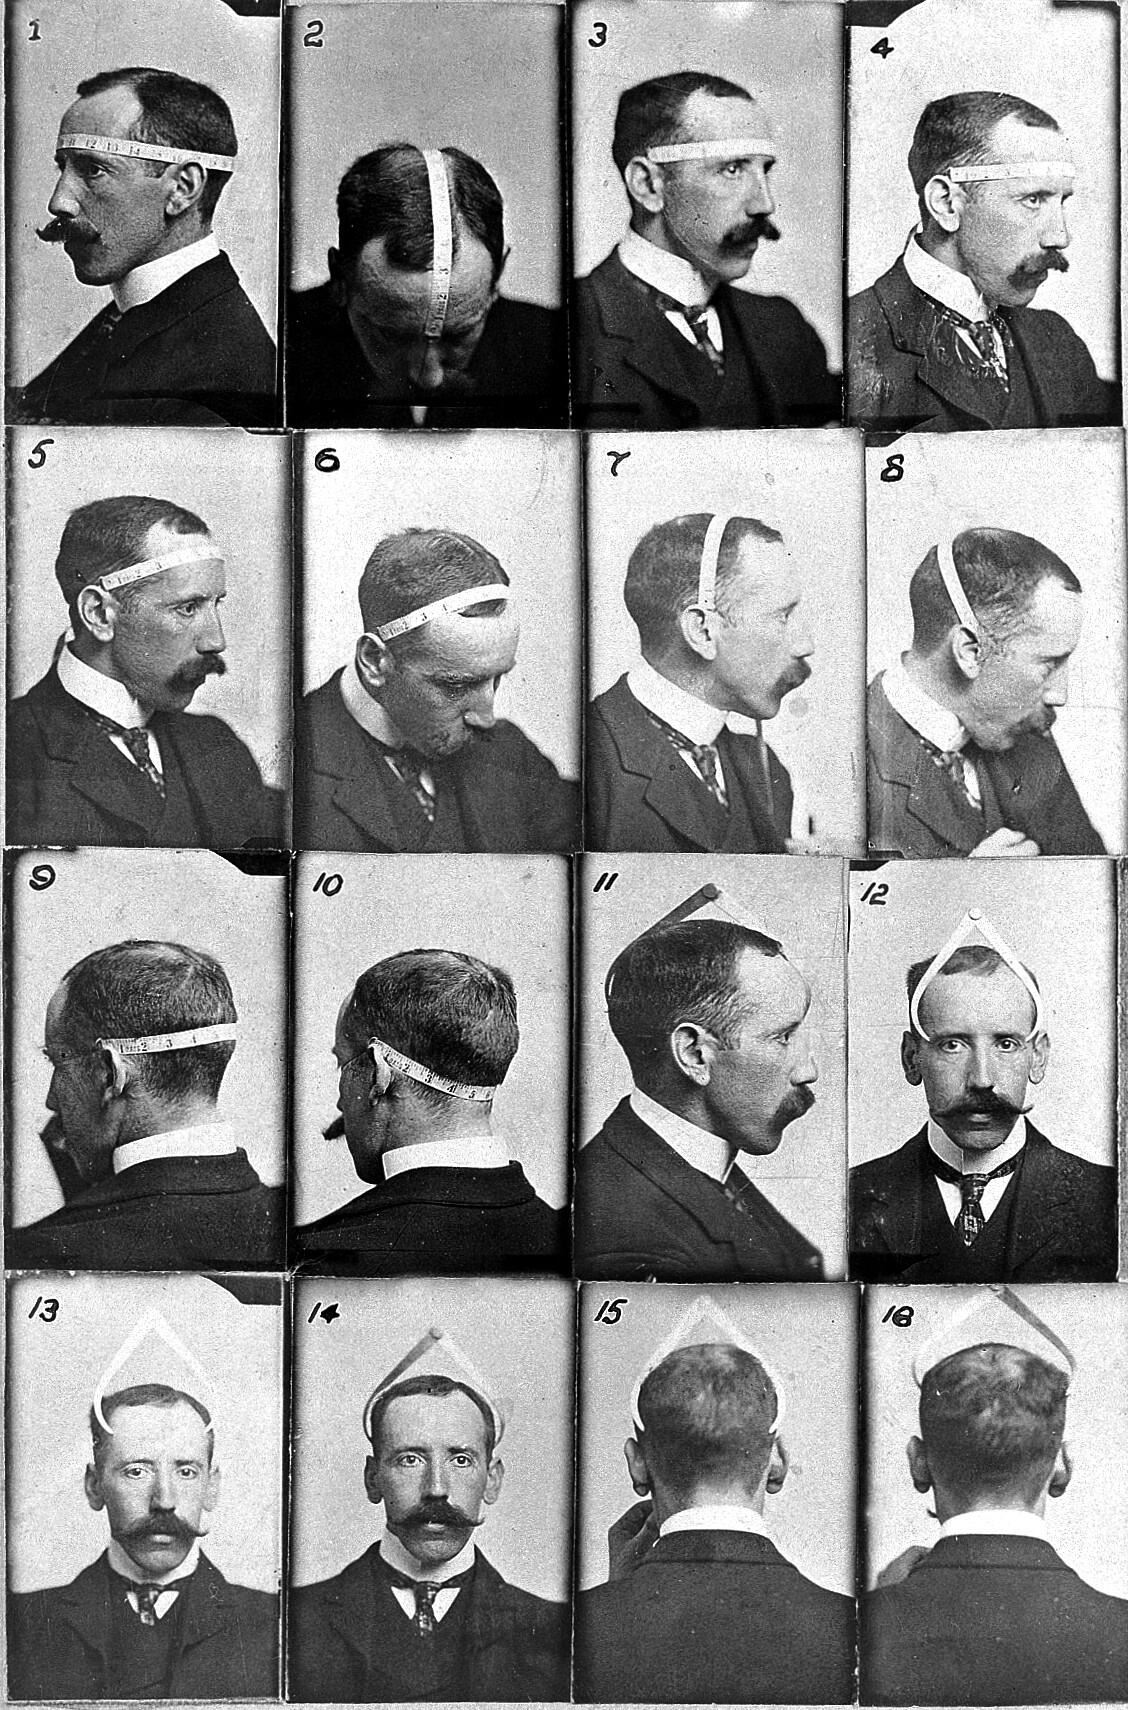 Grid of 16 small b/w portraits of Bernard Hollander demonstrating his system of cranial measurements.